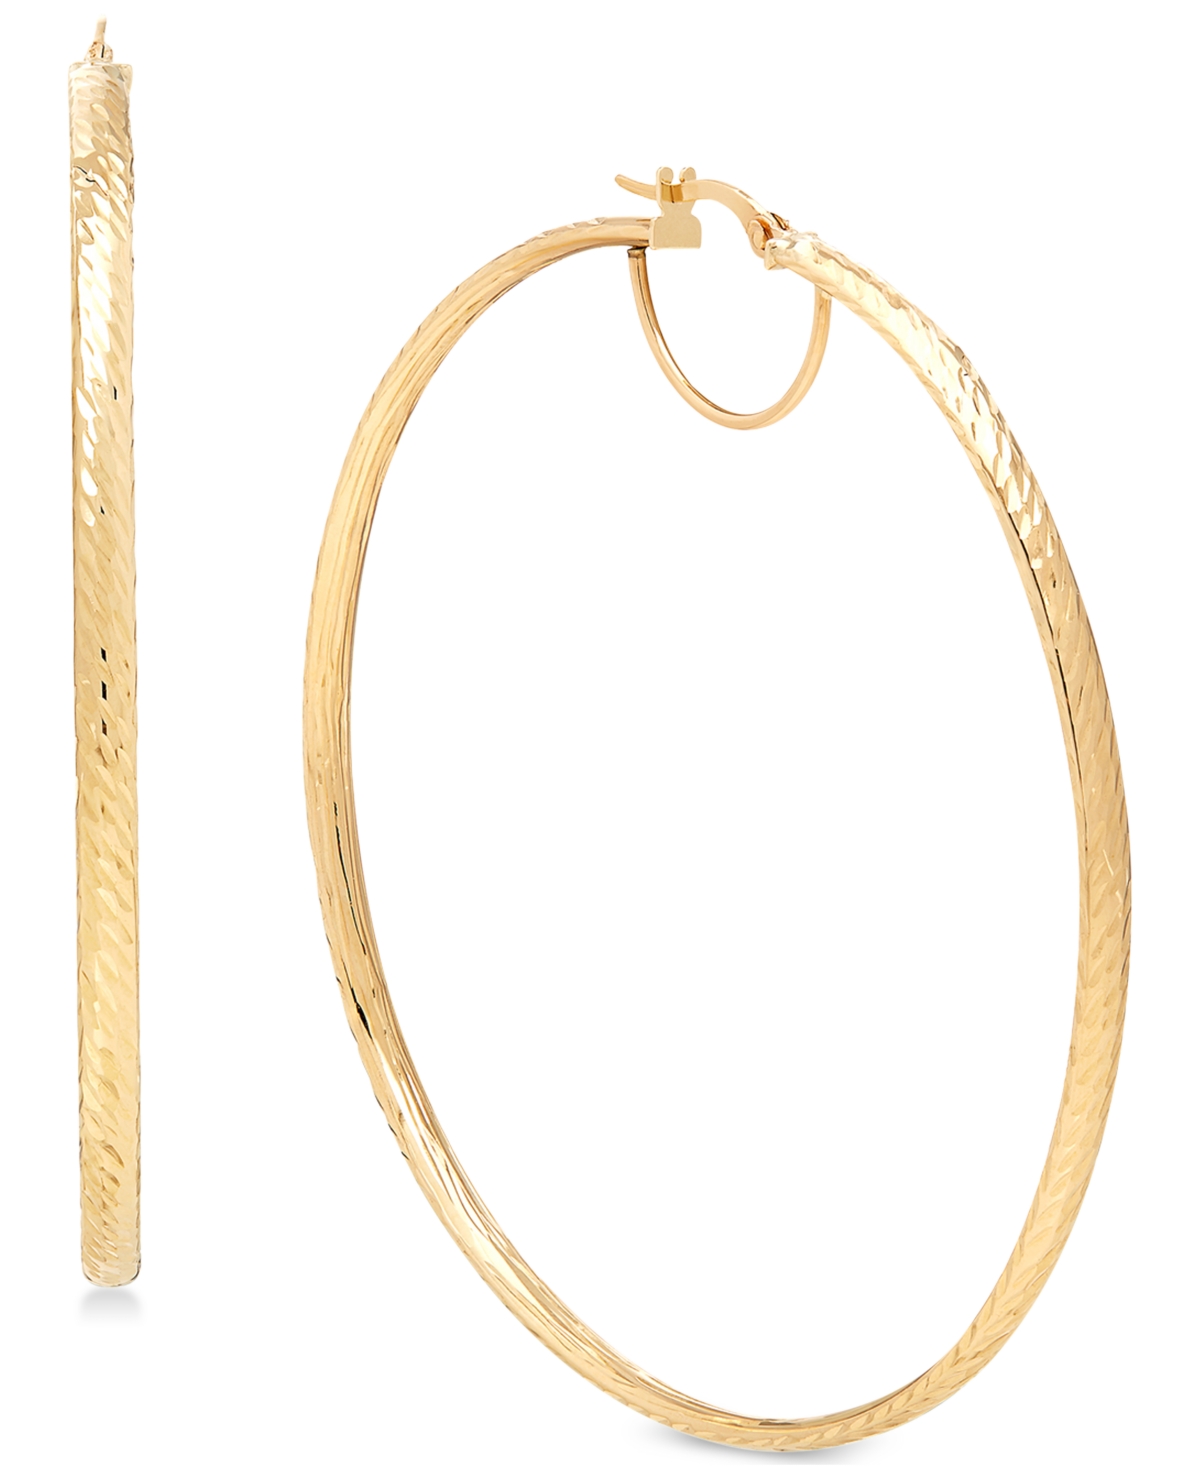 Round Hoop Earrings in 14k Gold, 60mm - Yellow Gold